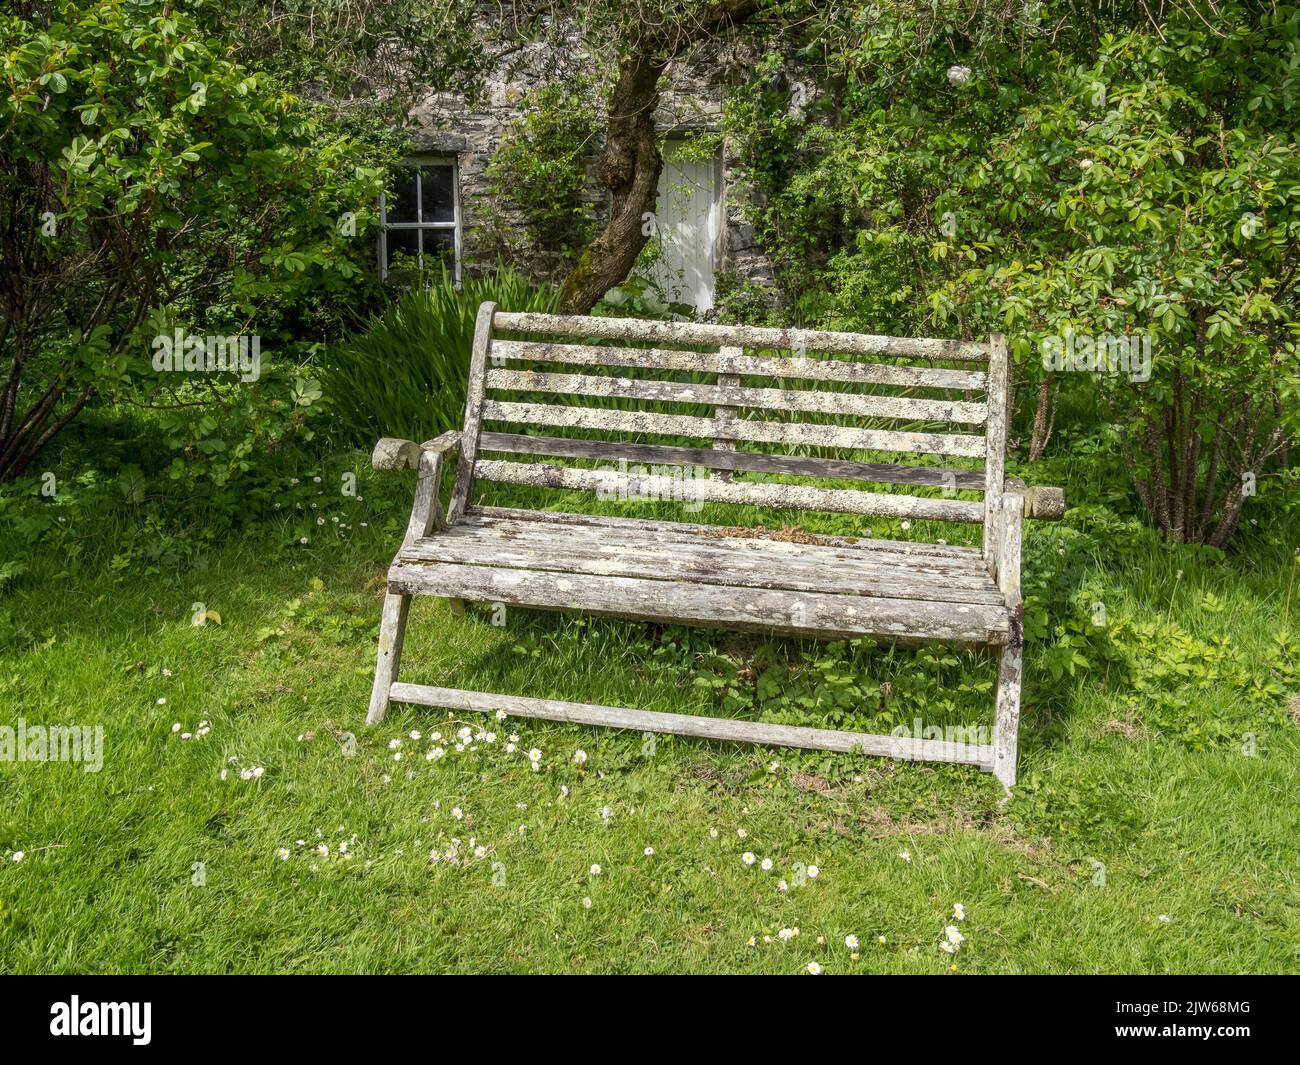 Old wooden garden bench seat covered with lichen Colonsay House Gardens, Isle of Colonsay, Scotland, UK. Stock Photo